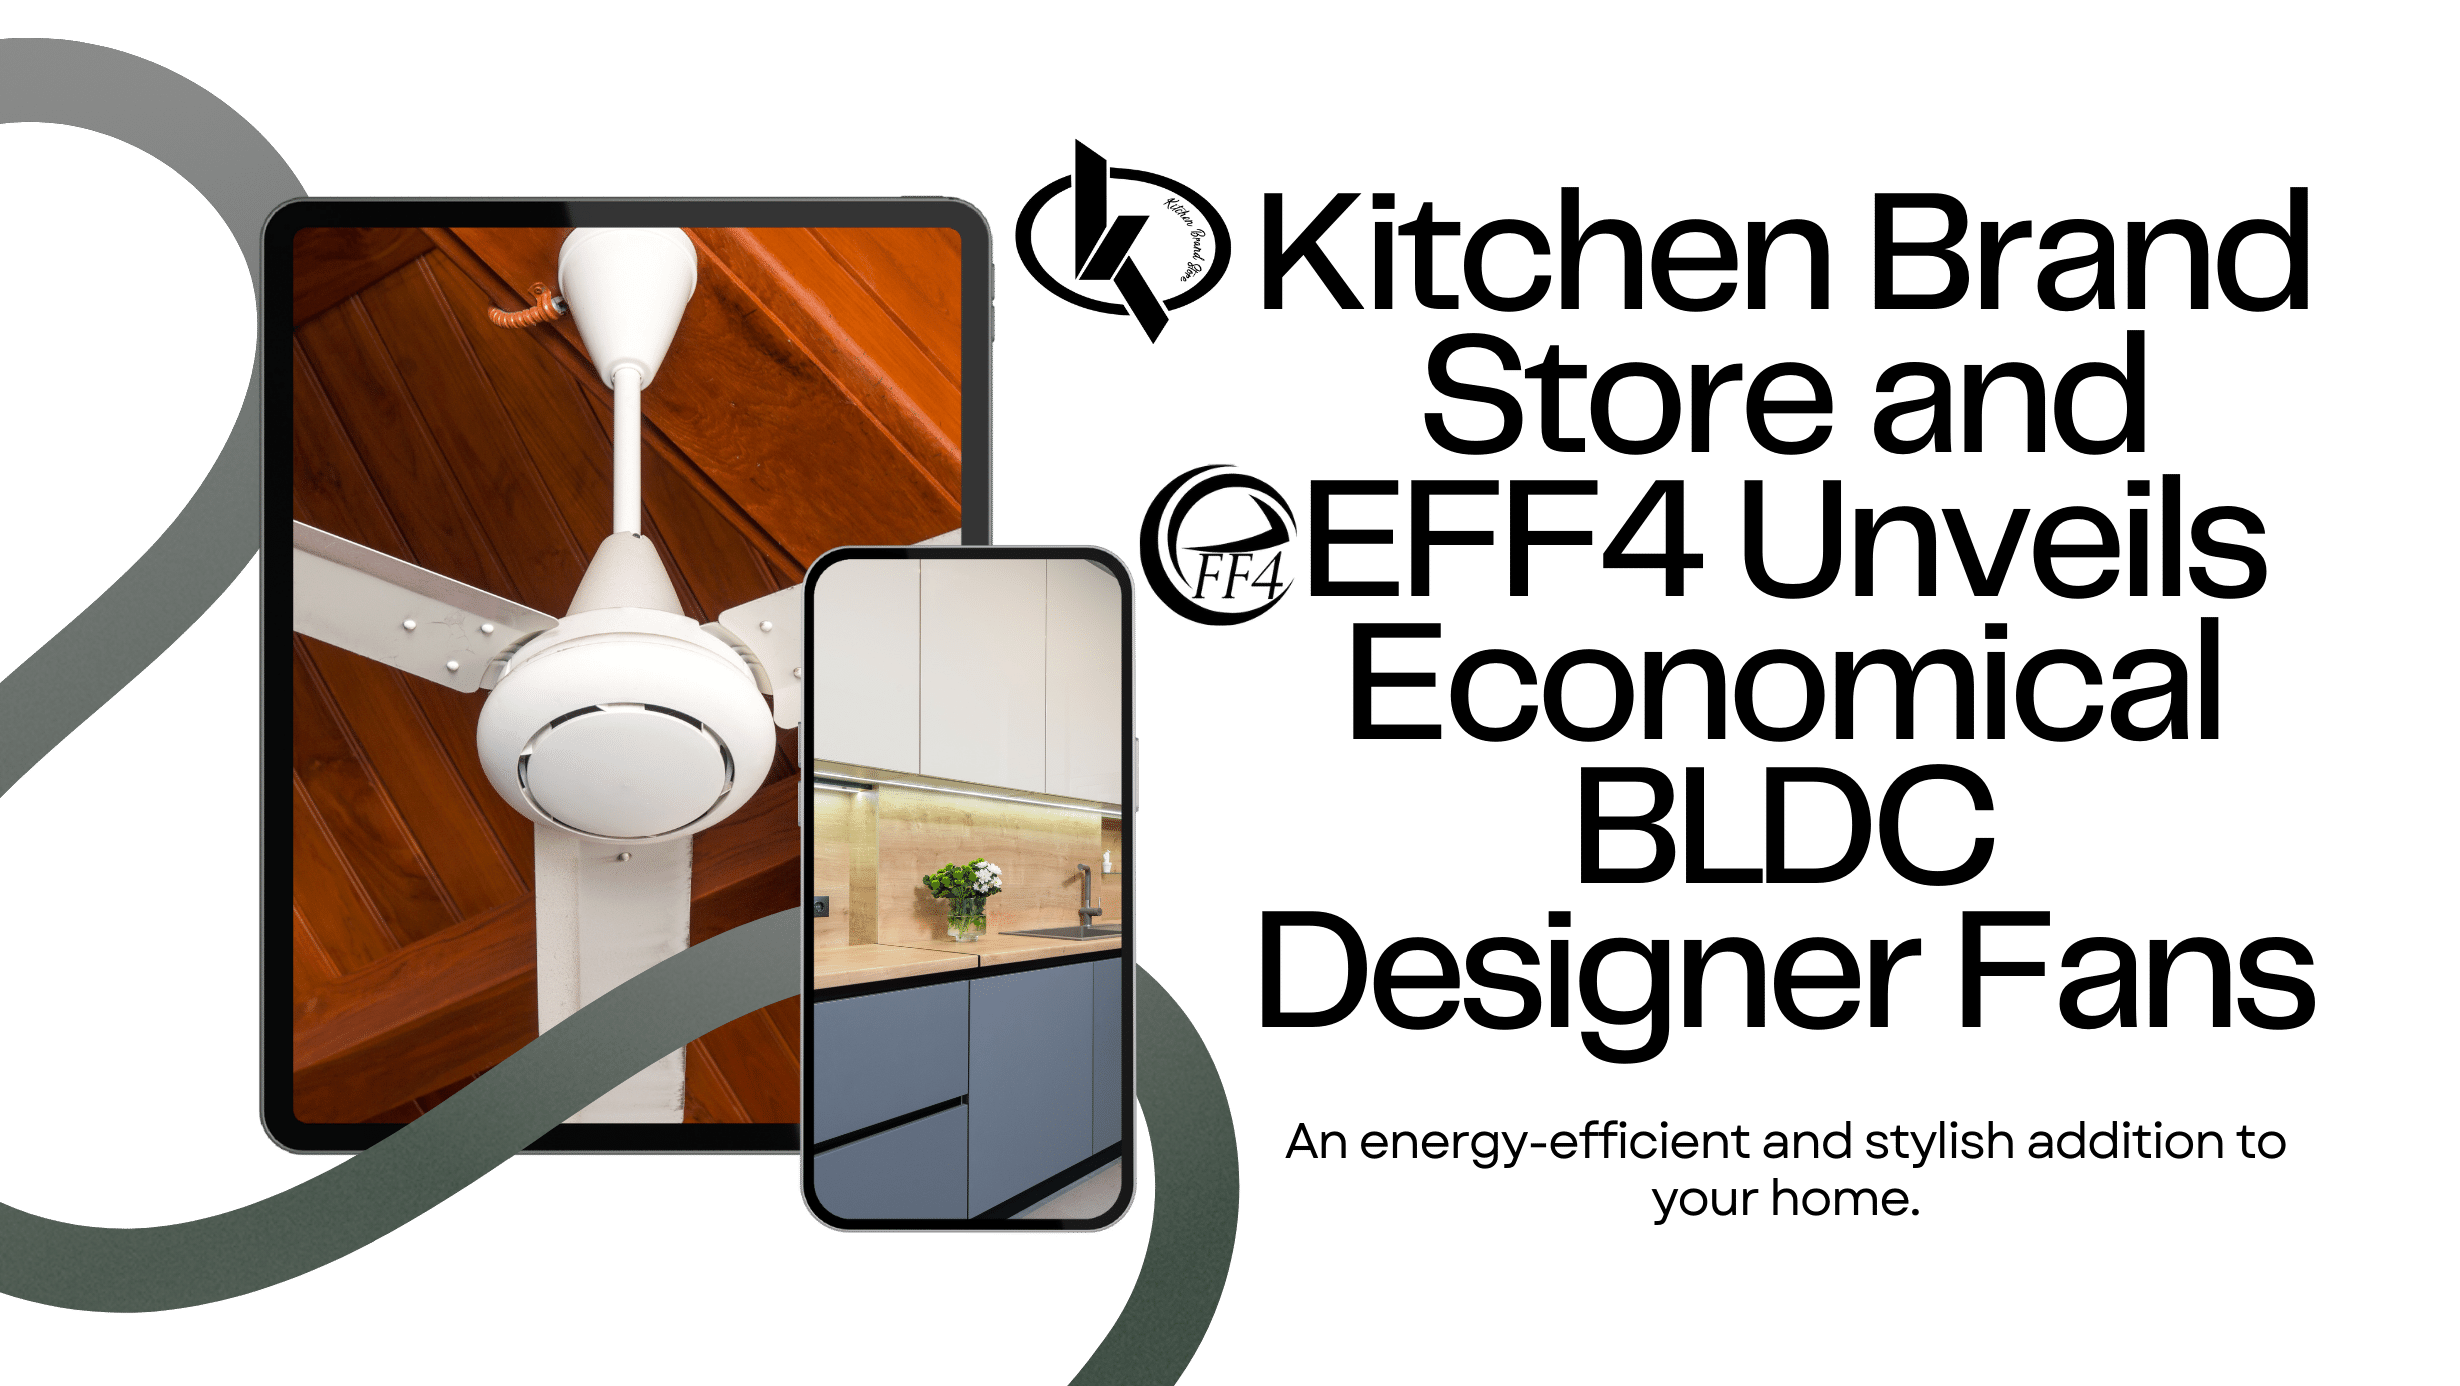 Introducing BLDC Designer Fans: A Partnership between Kitchen Brand Store and eff4